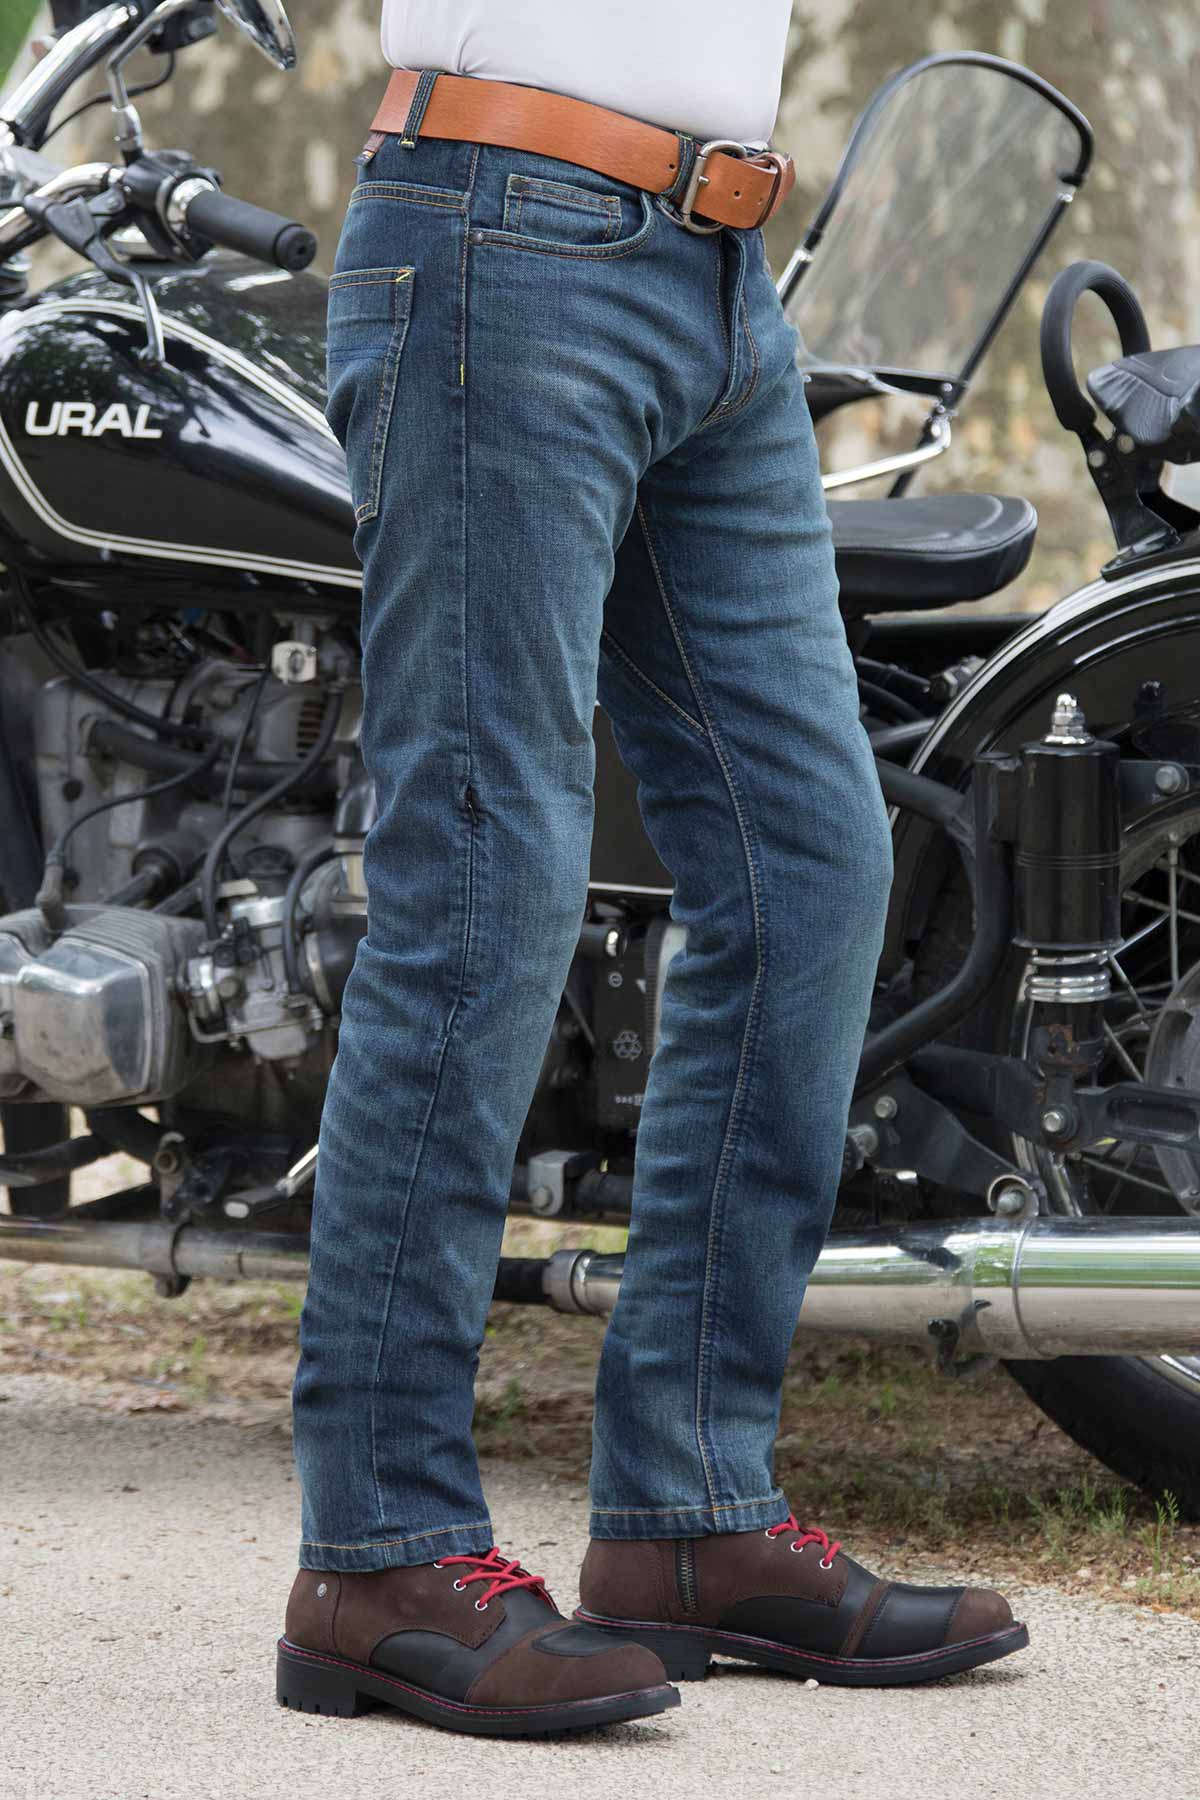 levis motorcycle jeans